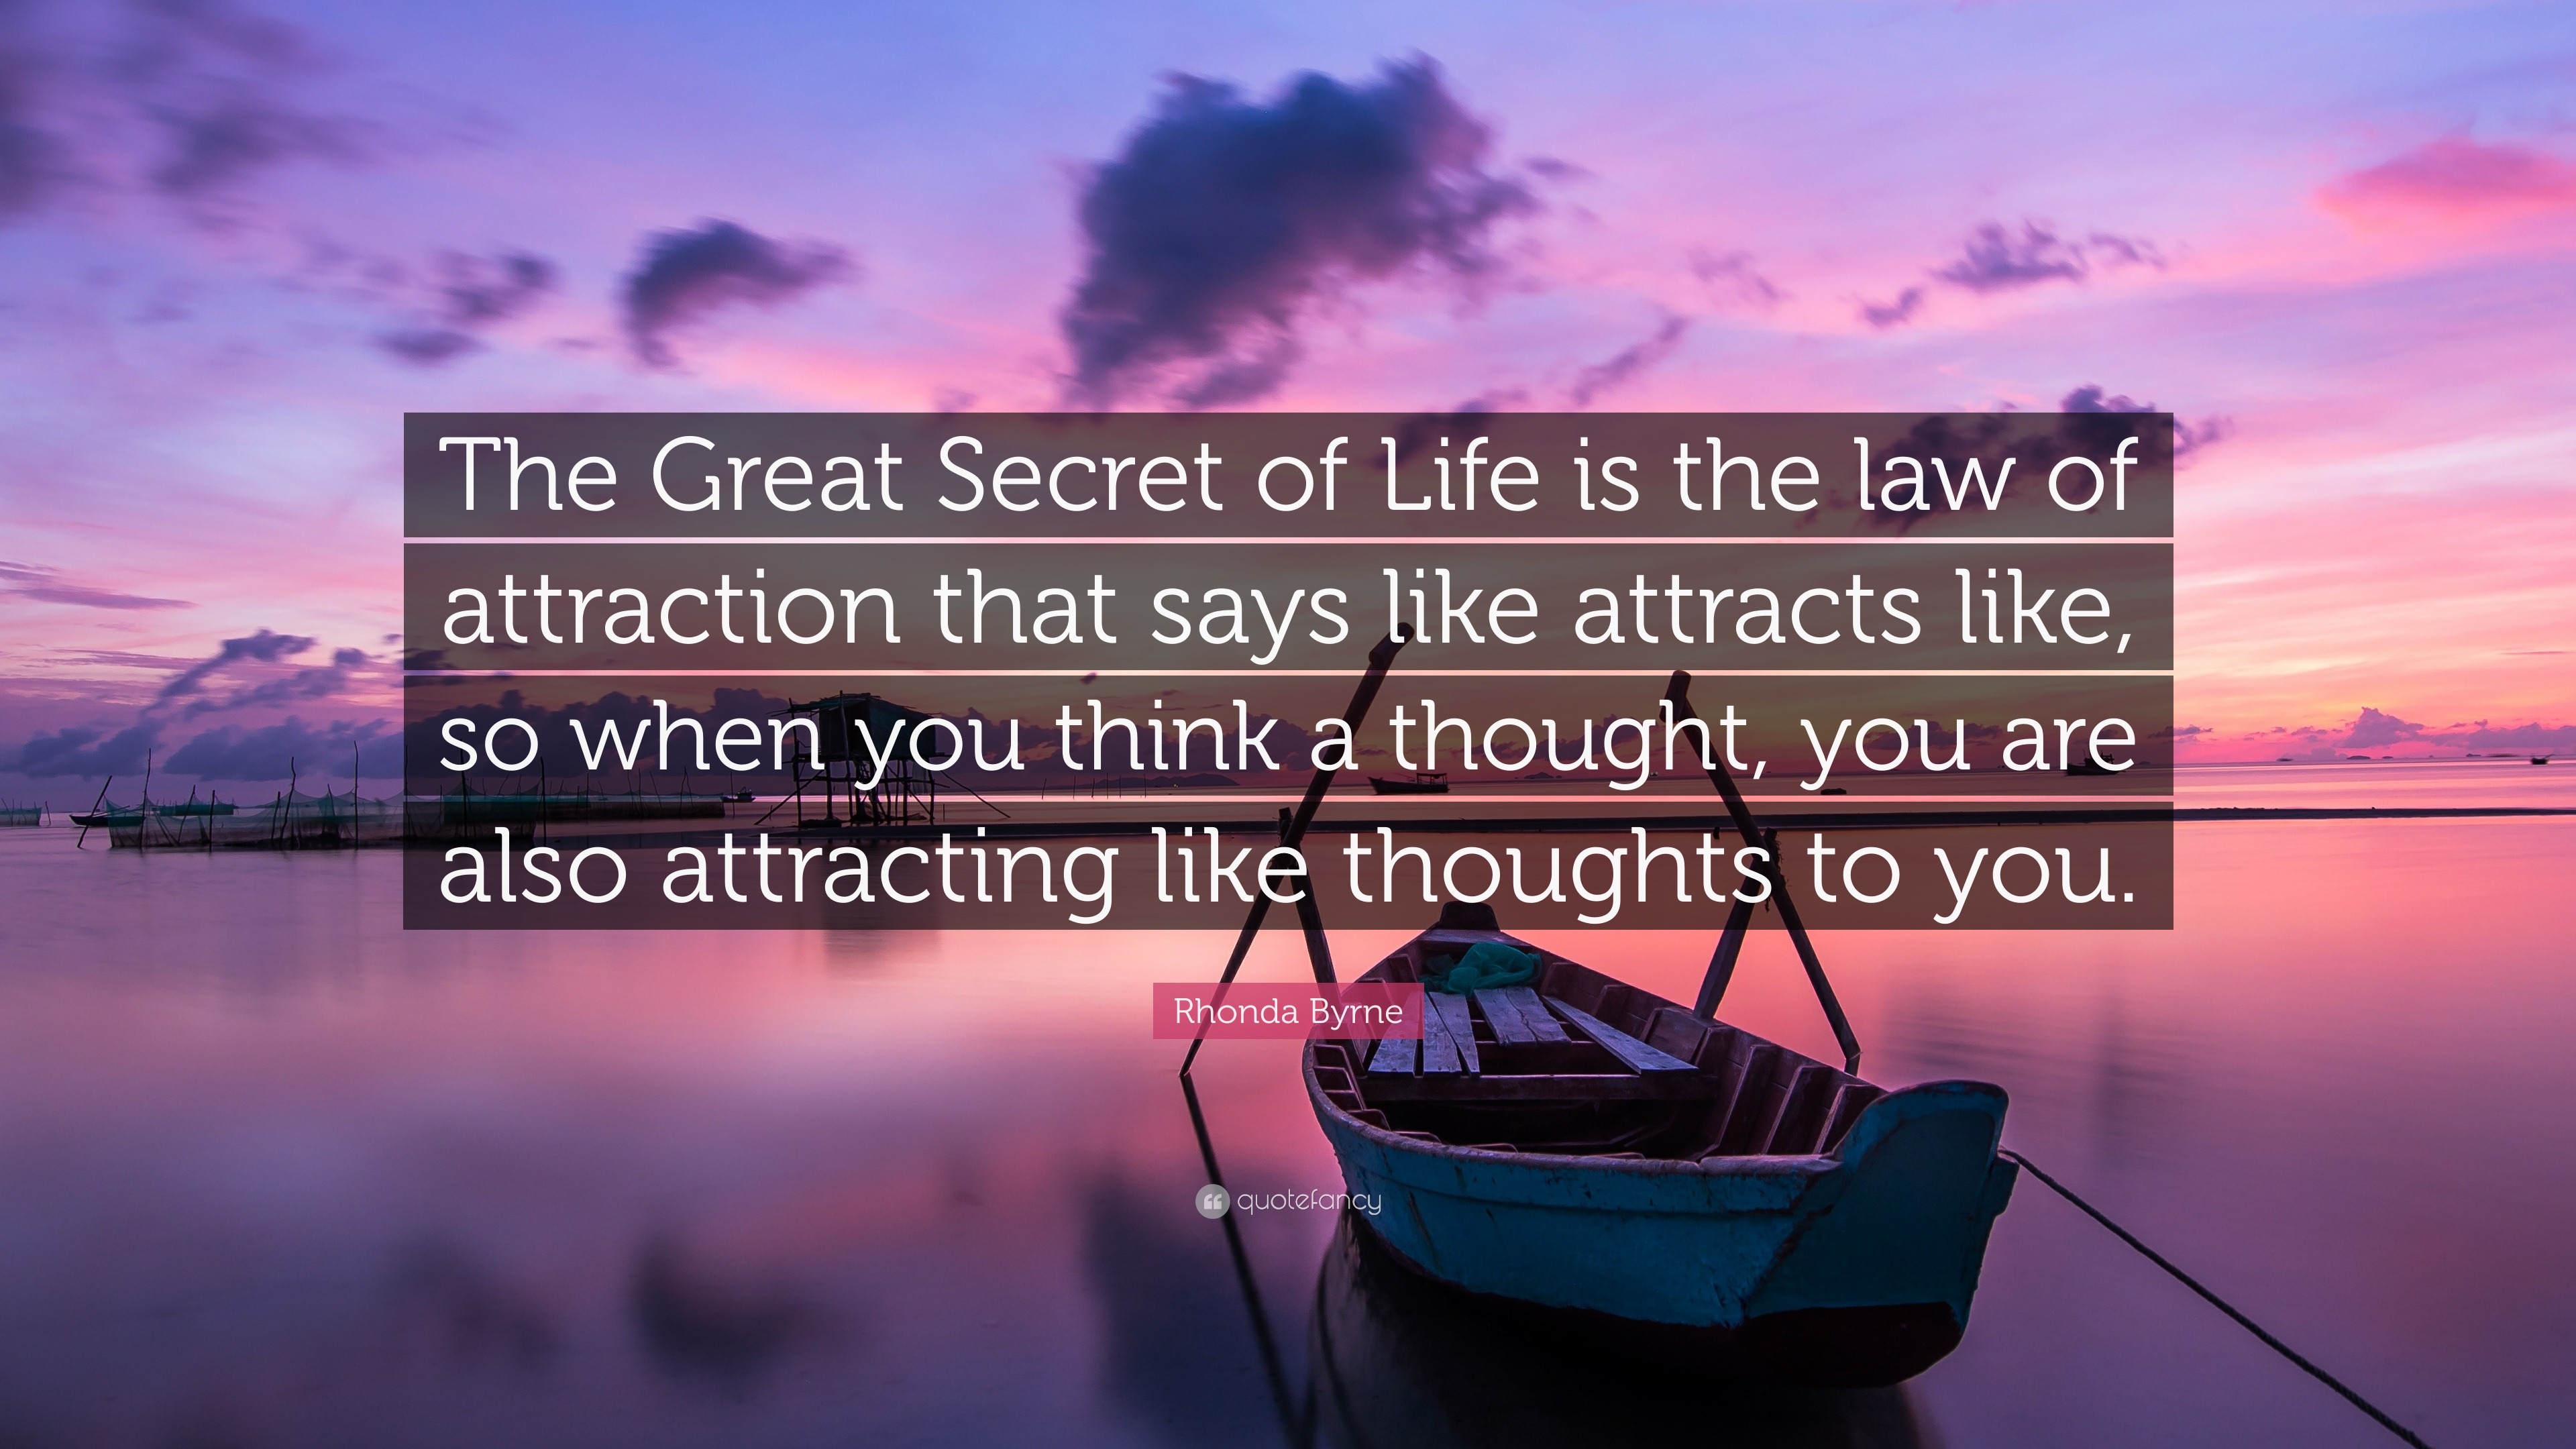 Rhonda Byrne Quote “The Great Secret of Life is the law